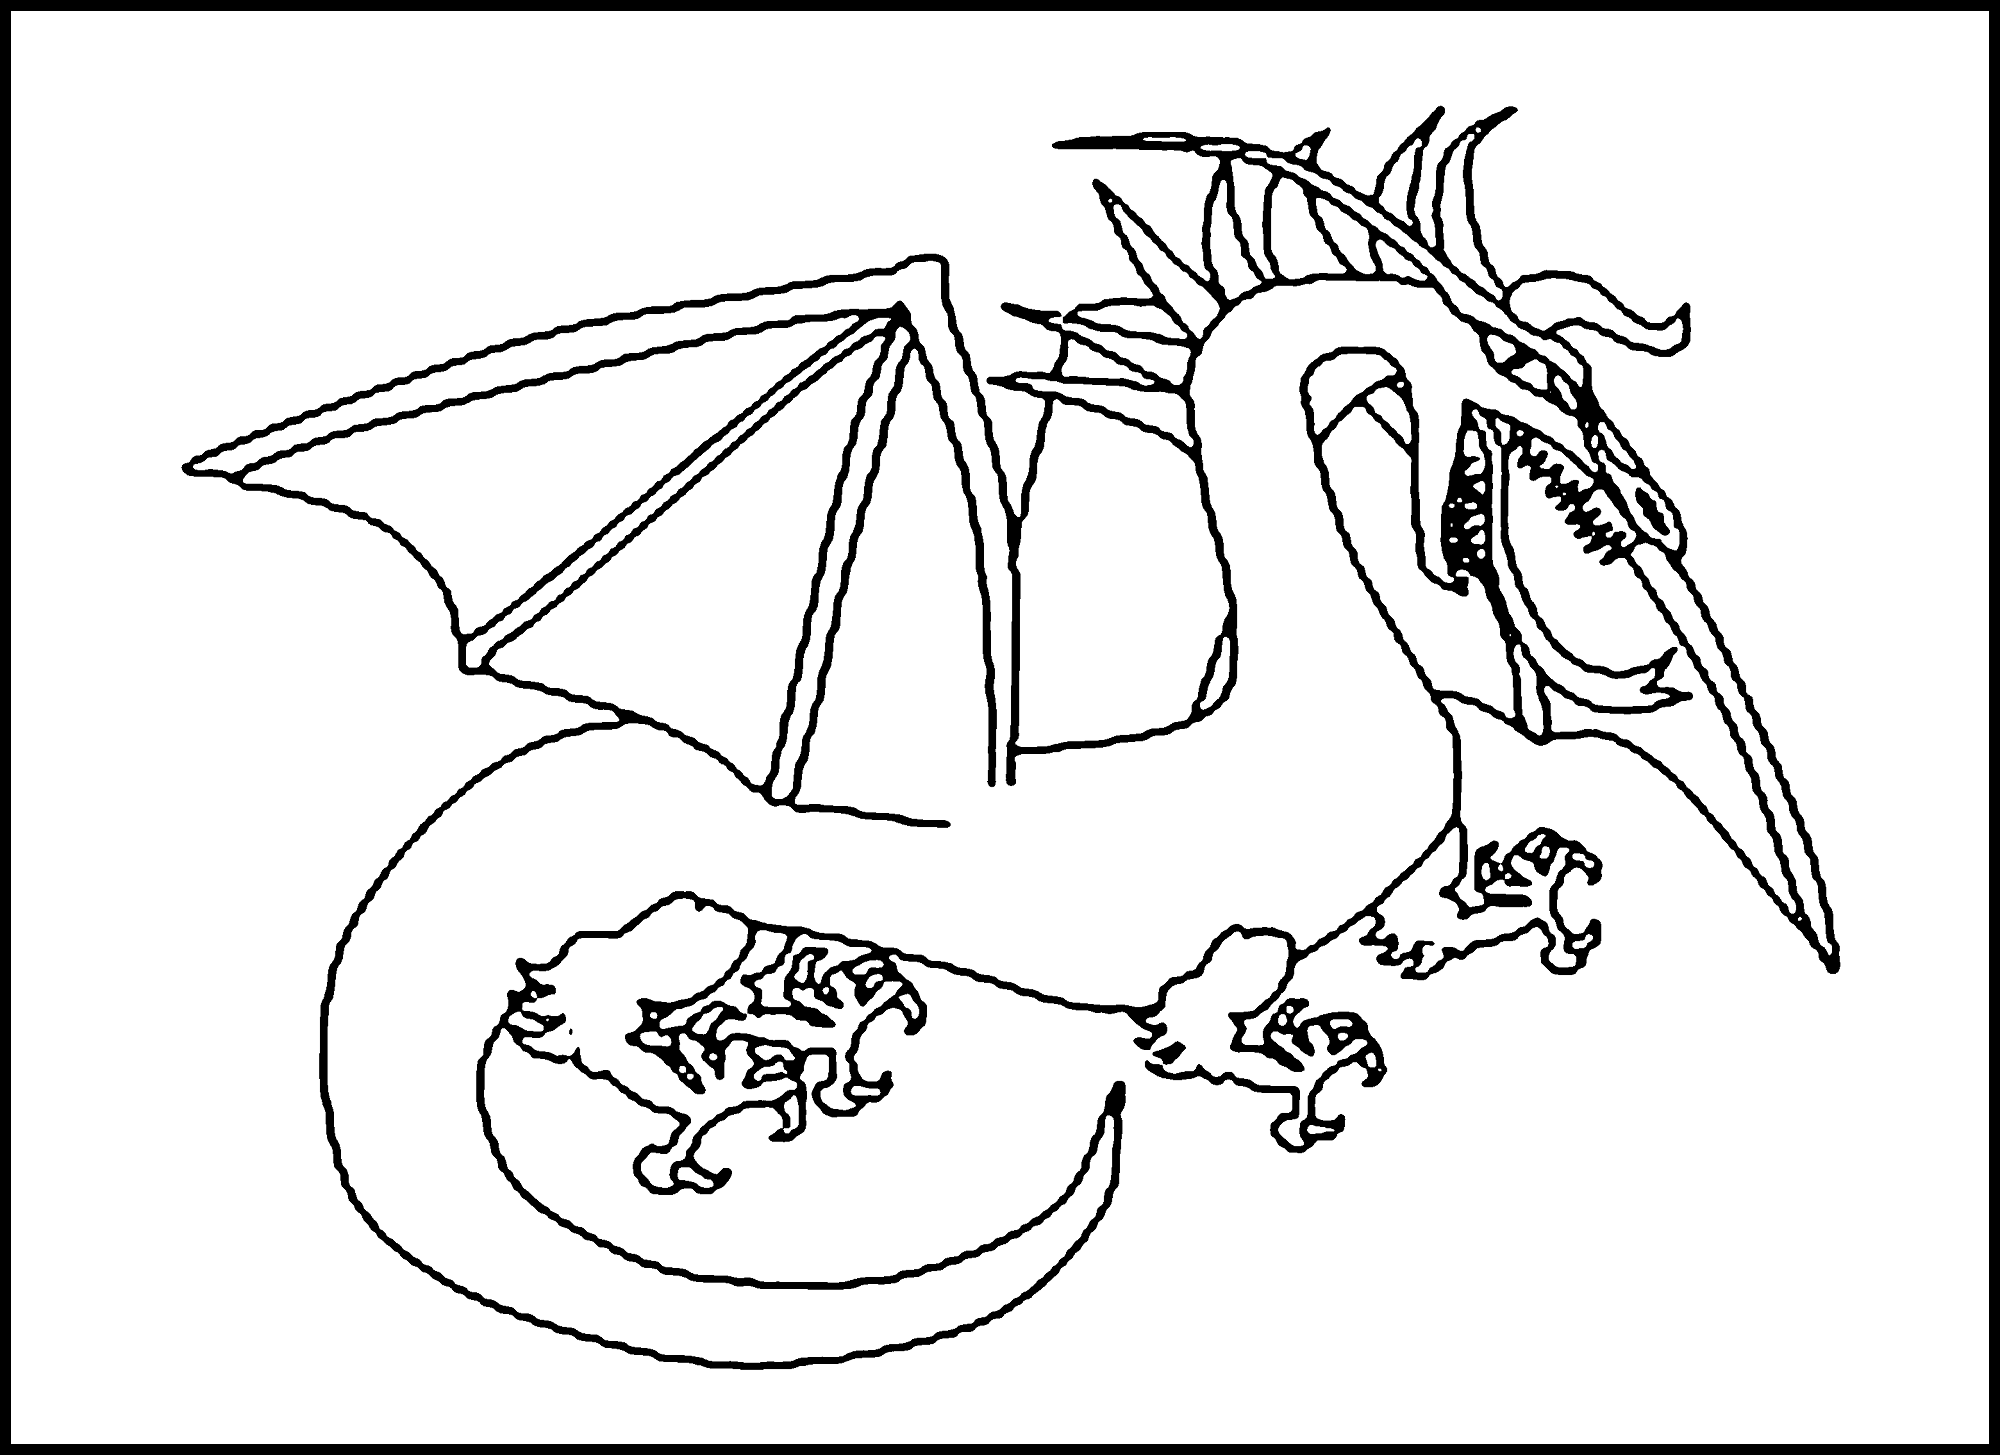 dragon coloring page chinese dragon coloring page free printable coloring pages dragon page coloring 